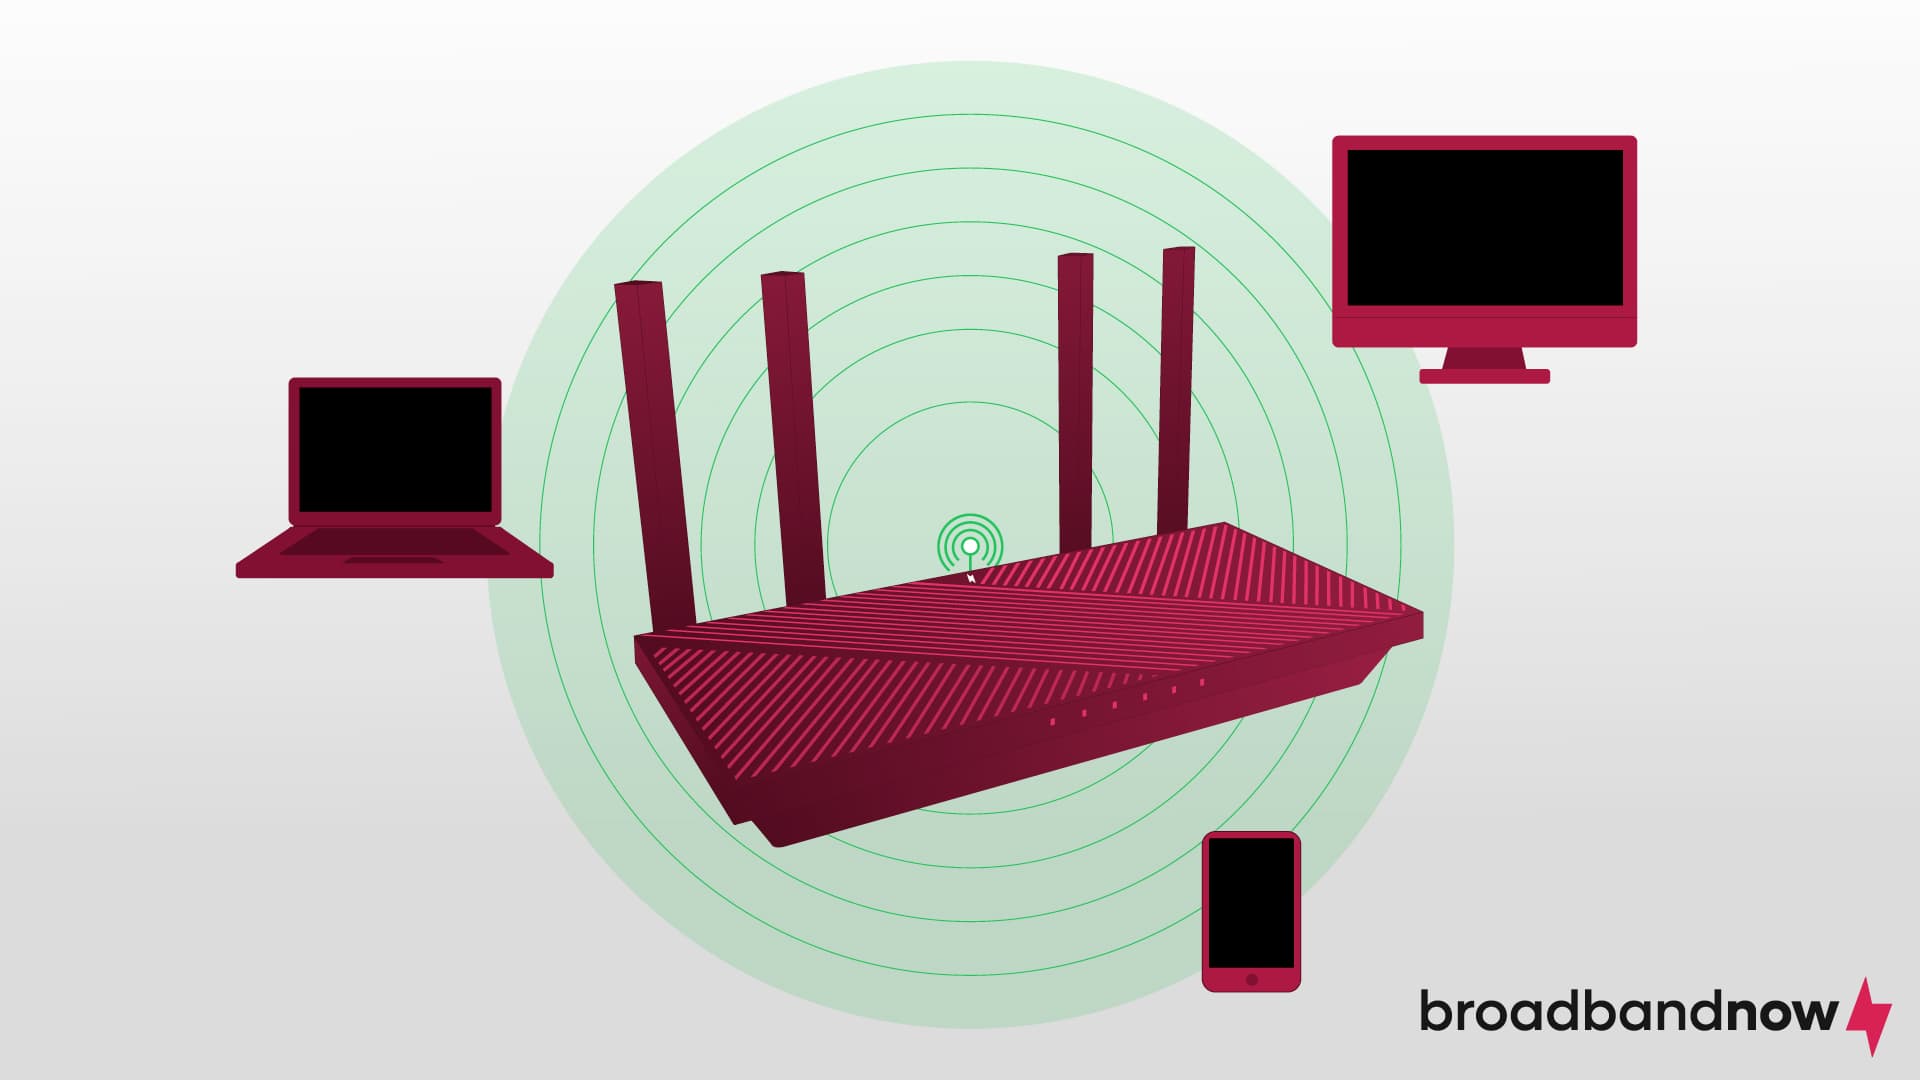 A graphic of a router in the center emitting green signals to a laptop, PC, and smartphone.